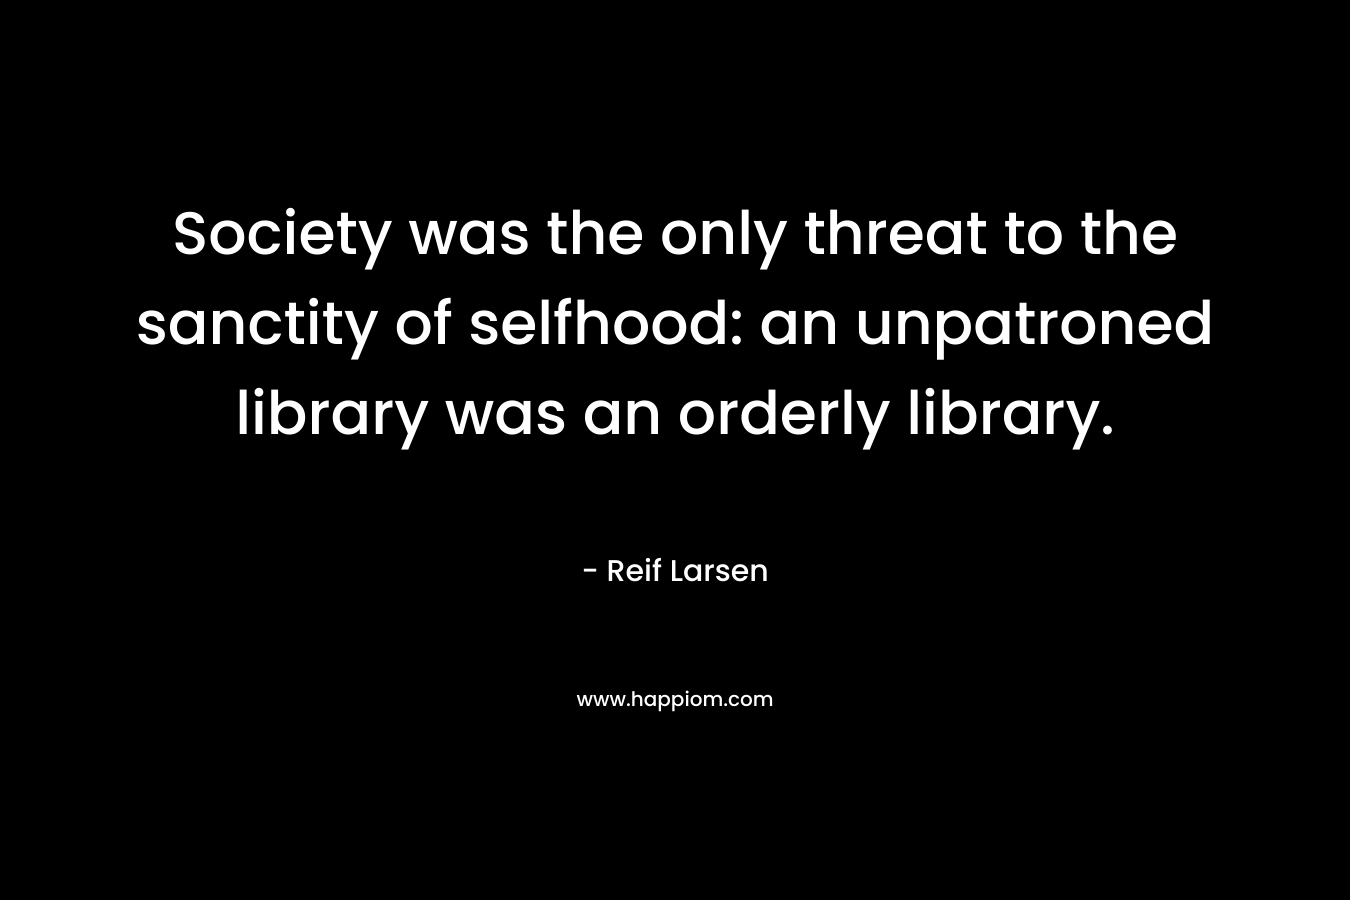 Society was the only threat to the sanctity of selfhood: an unpatroned library was an orderly library. – Reif Larsen